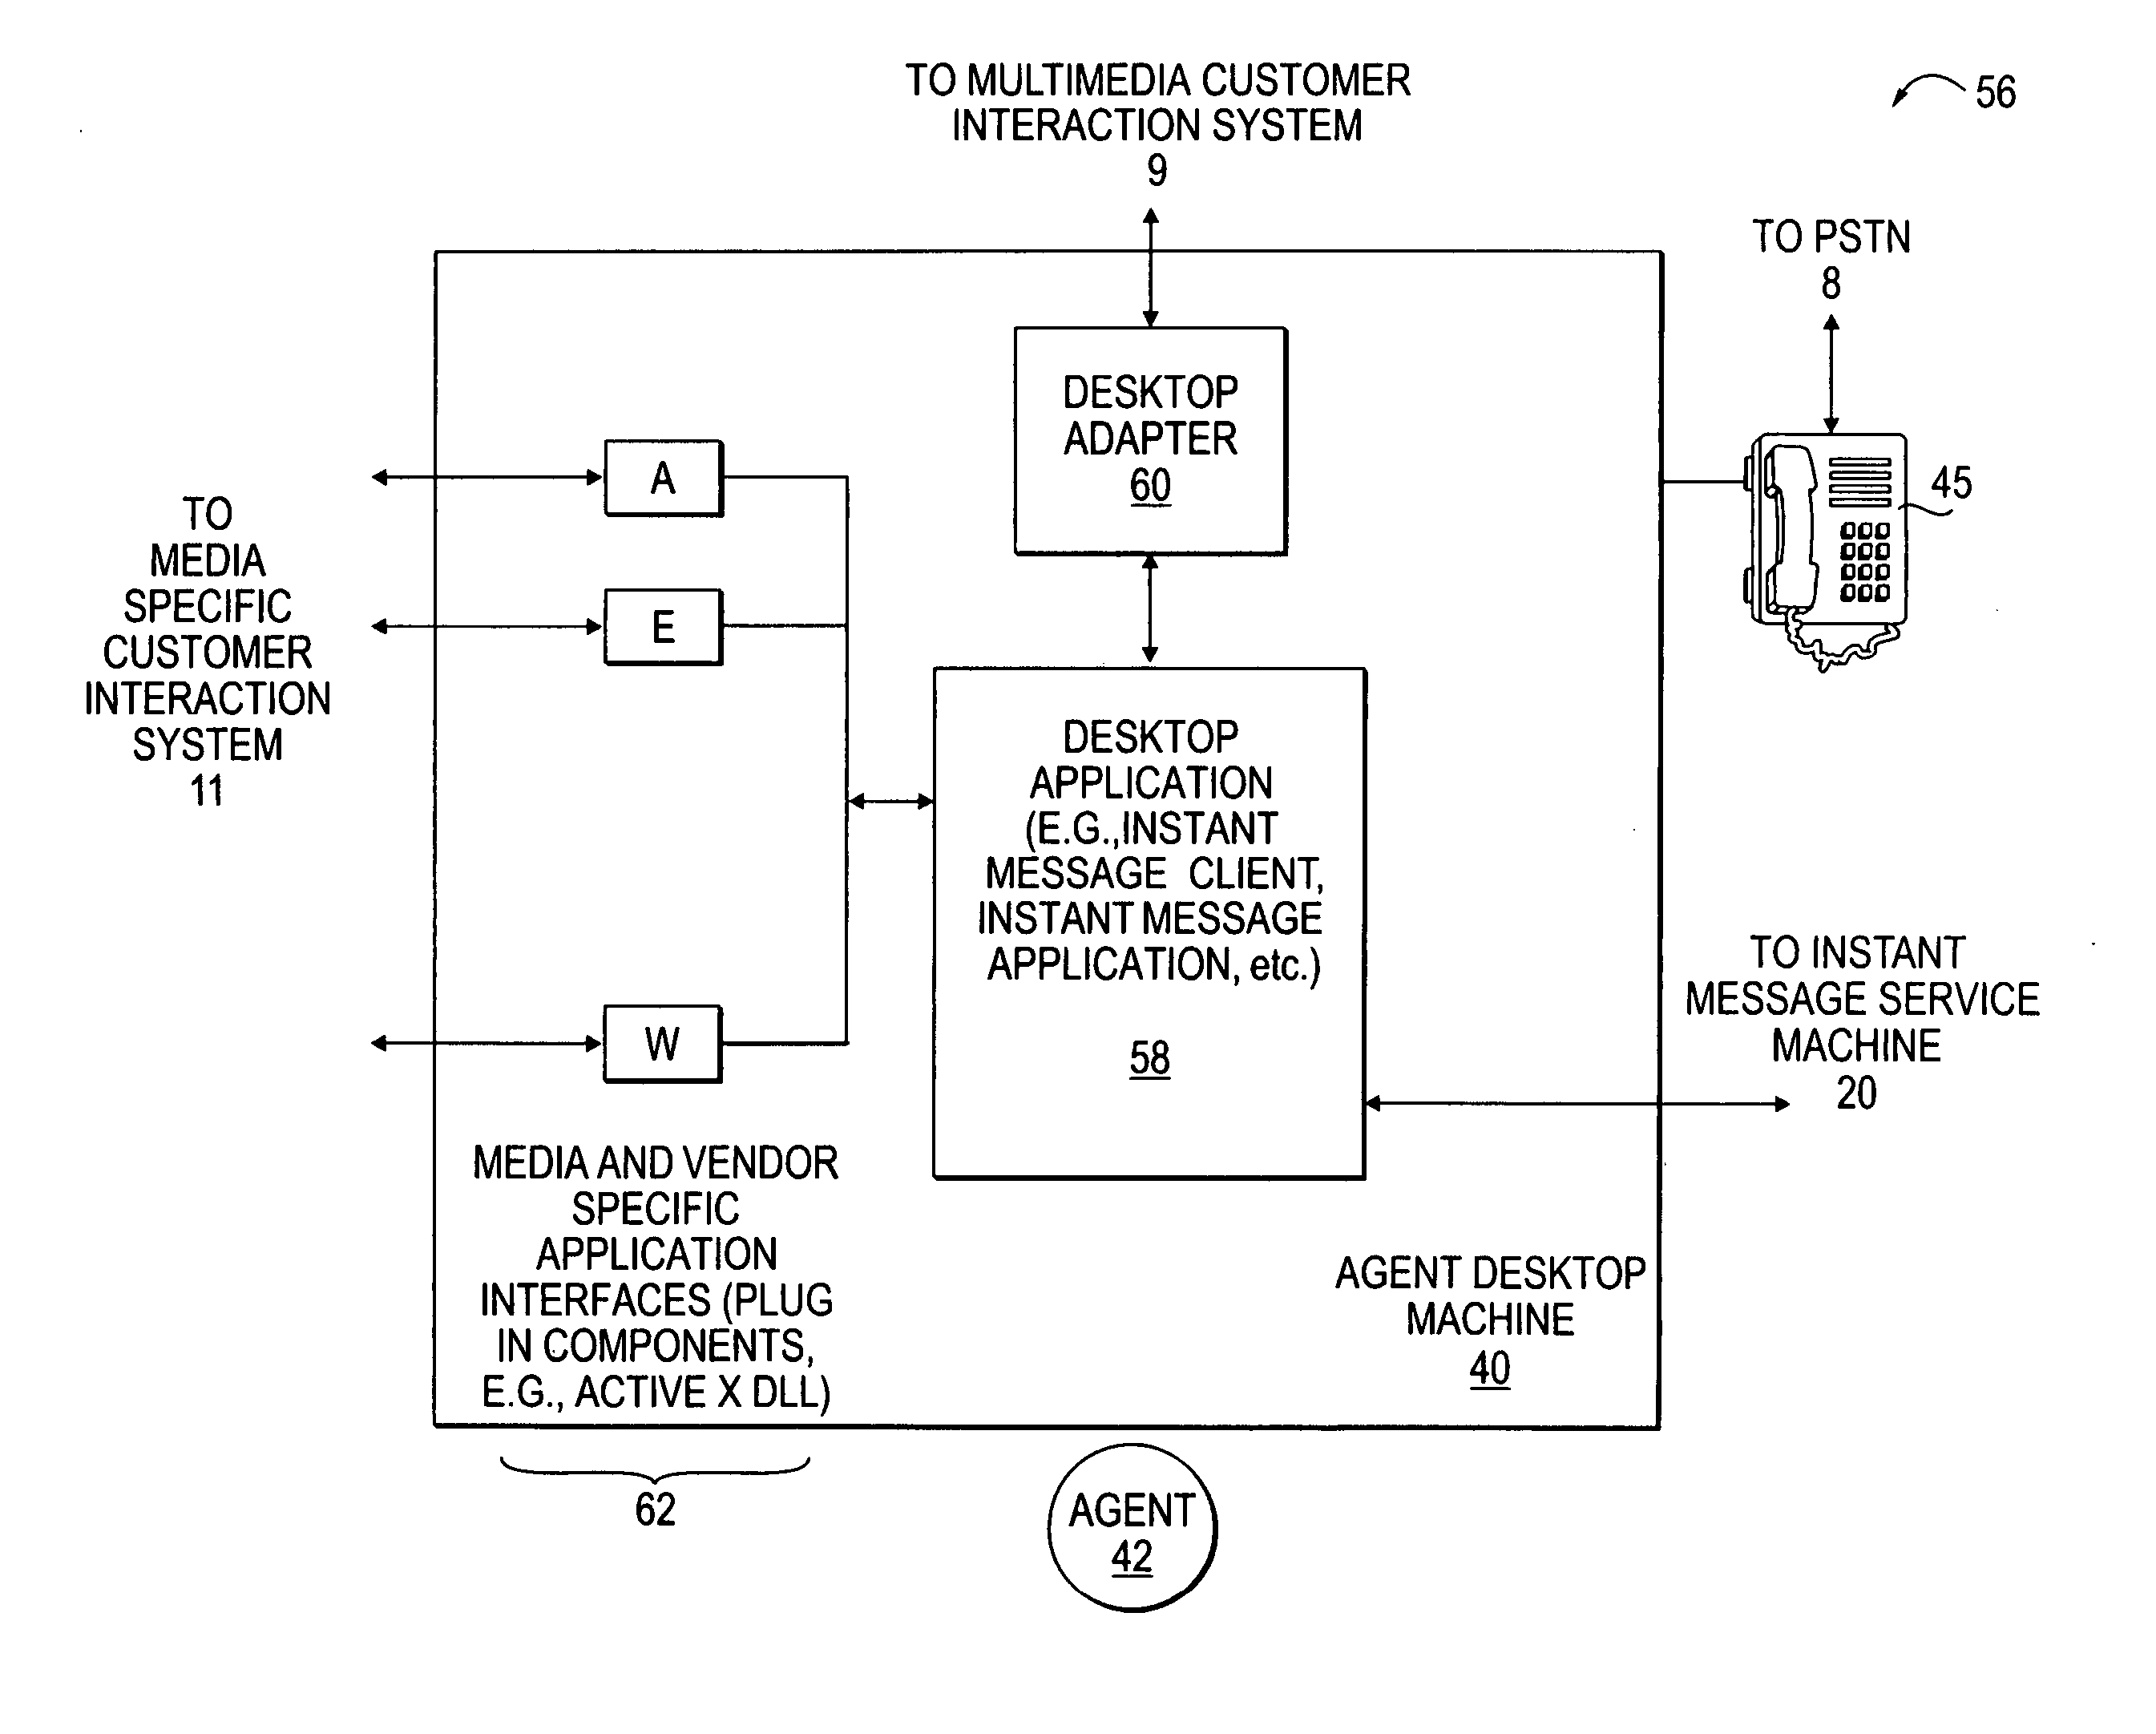 Method and system to provide expert support with a customer interaction system